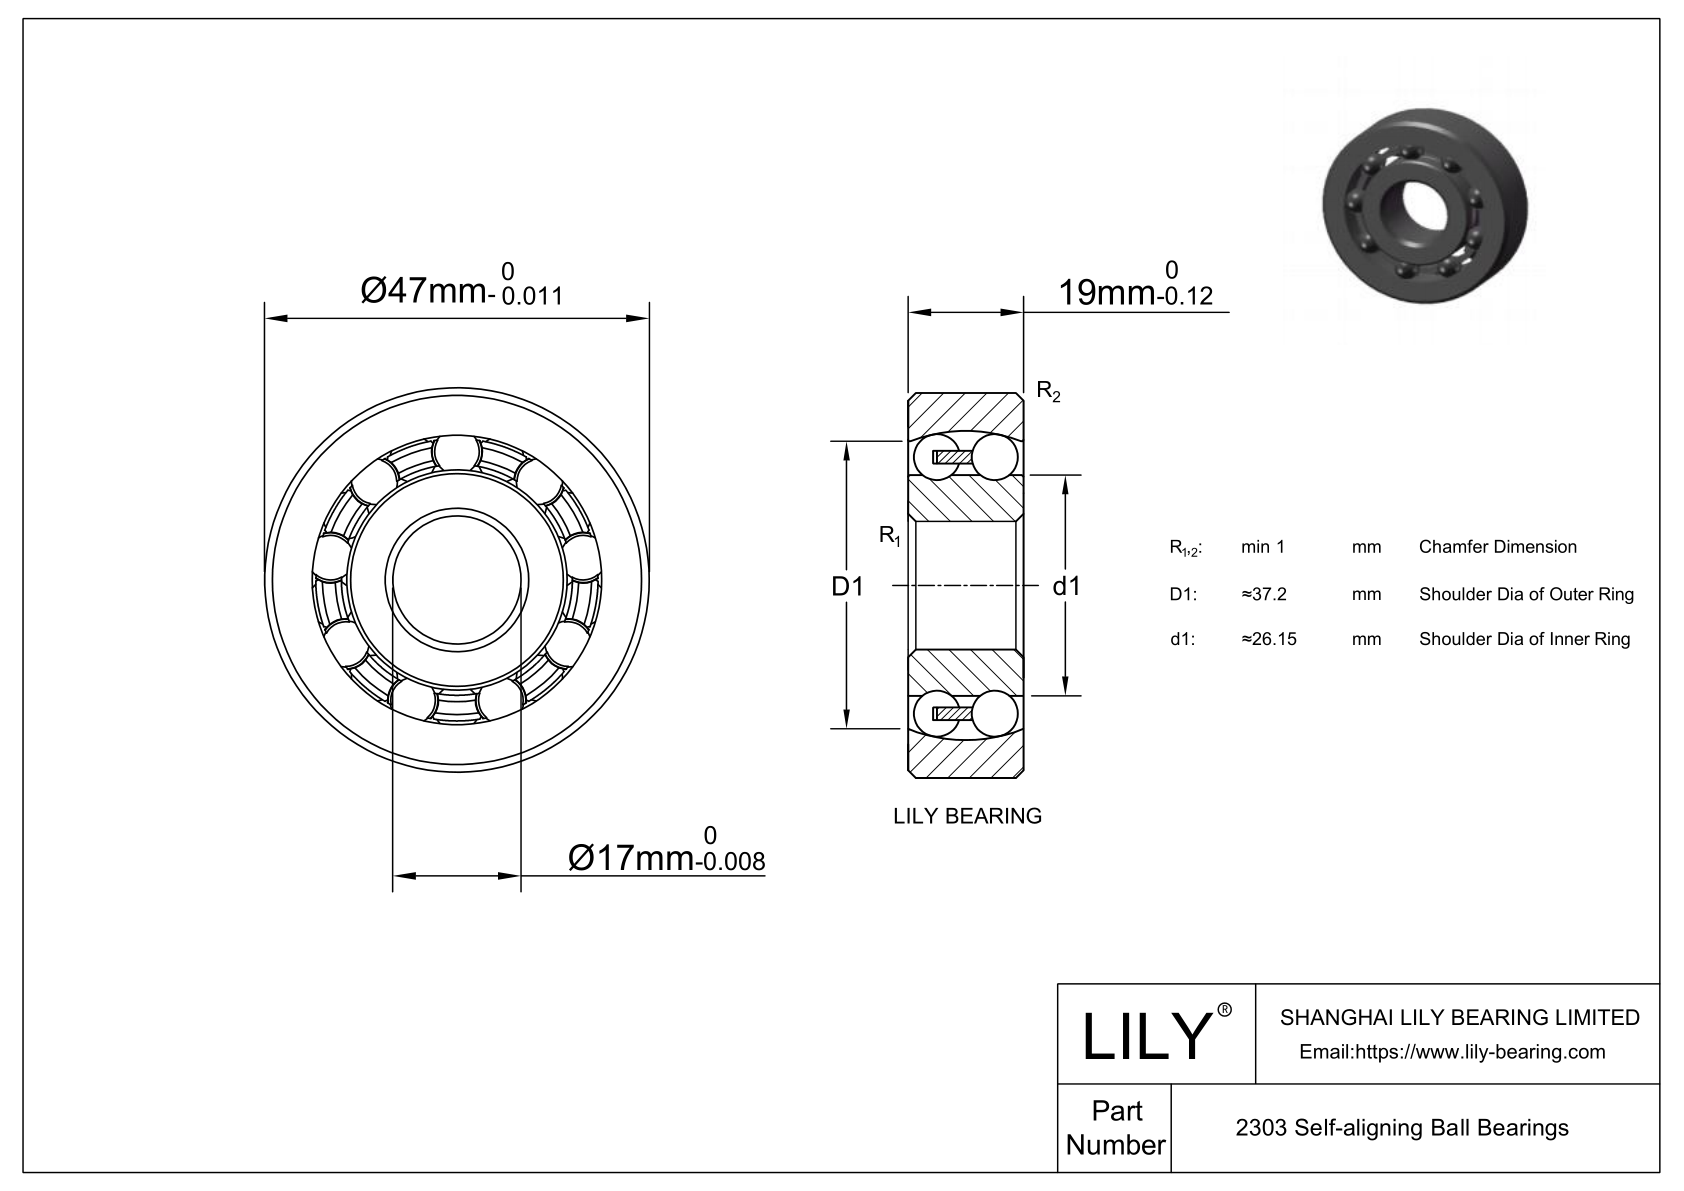 S2303 Stainless Steel Self Aligning Ball Bearings cad drawing